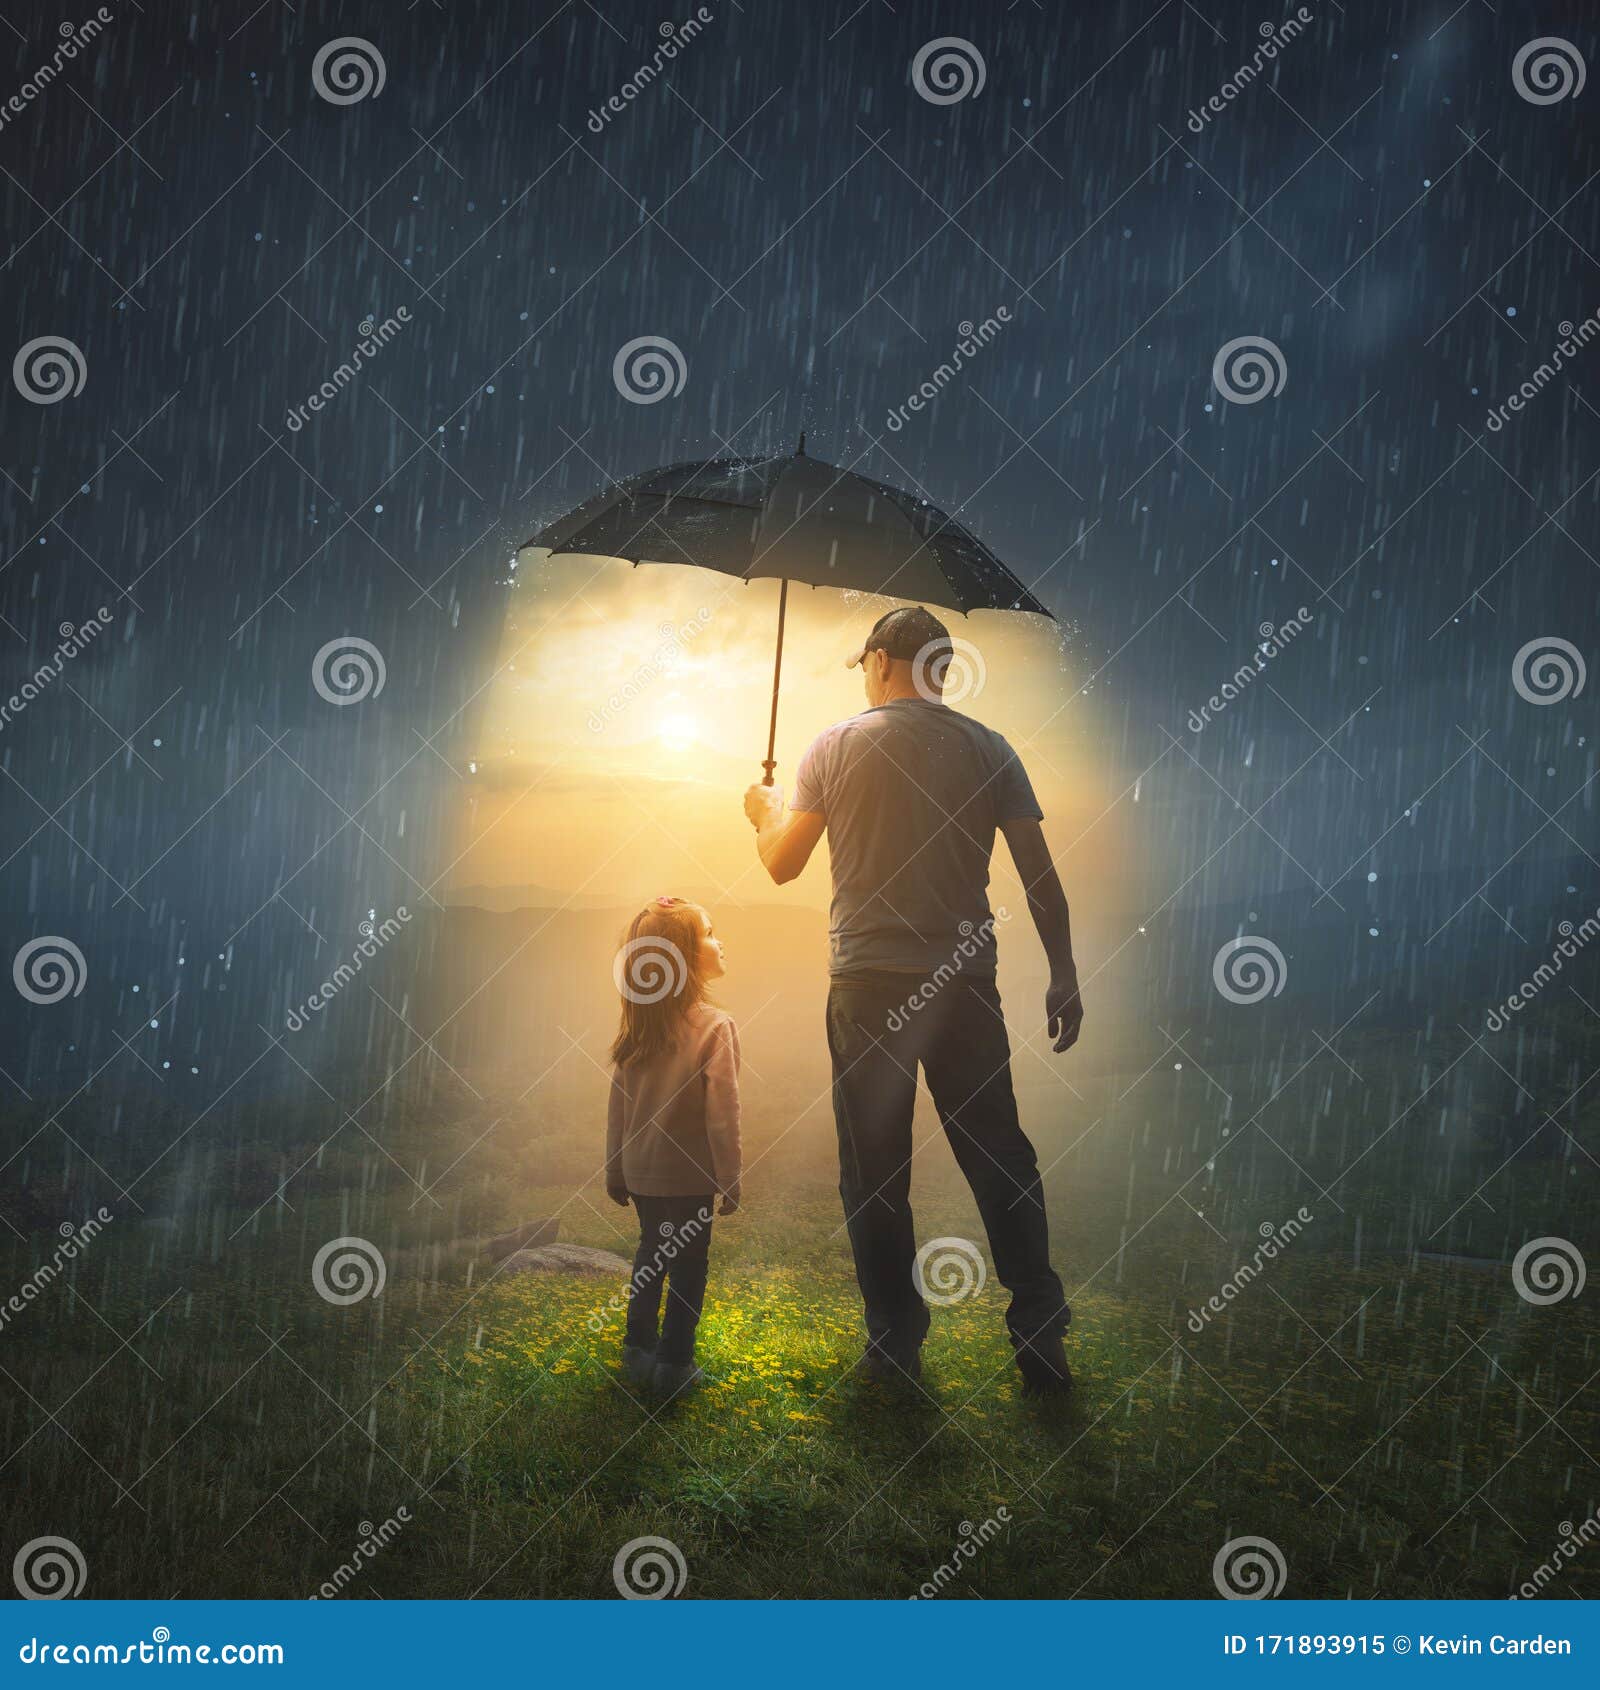 father and daughter in the rain